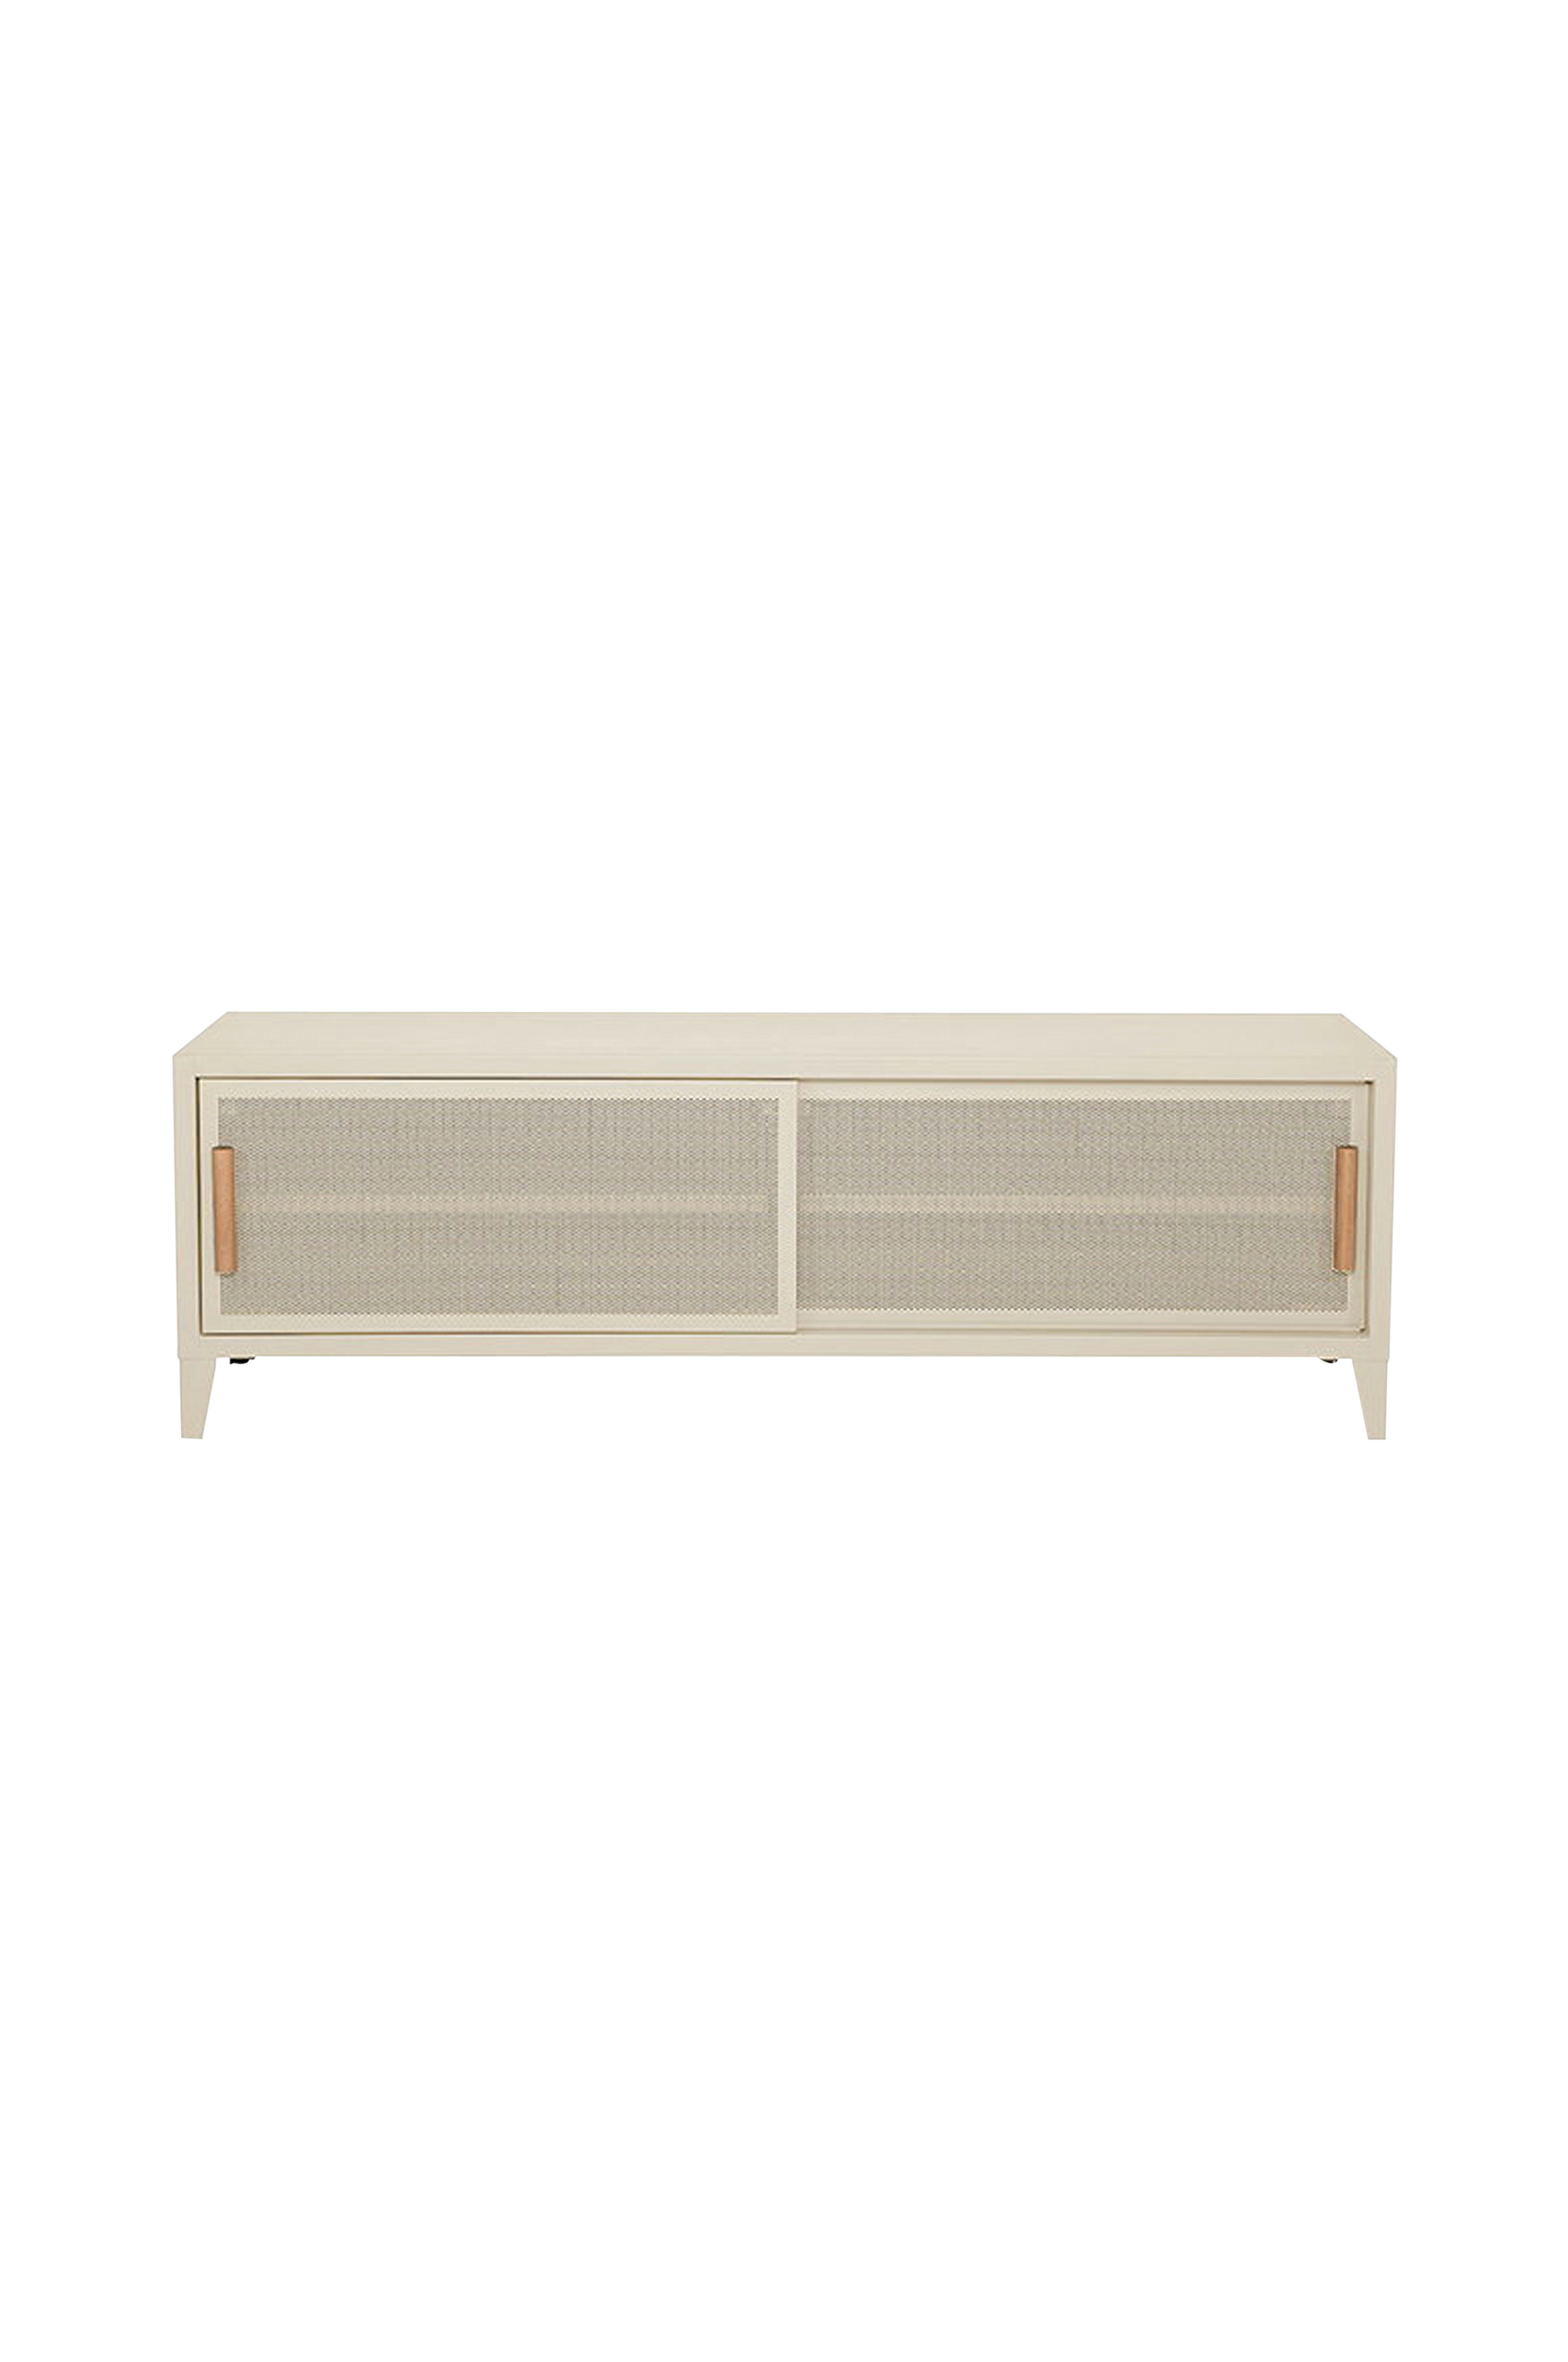 Tolix - Tv-bänk TV Hi-Fi Perforated B2 Low 120 Painted with PEFC Oak Handles - Beige